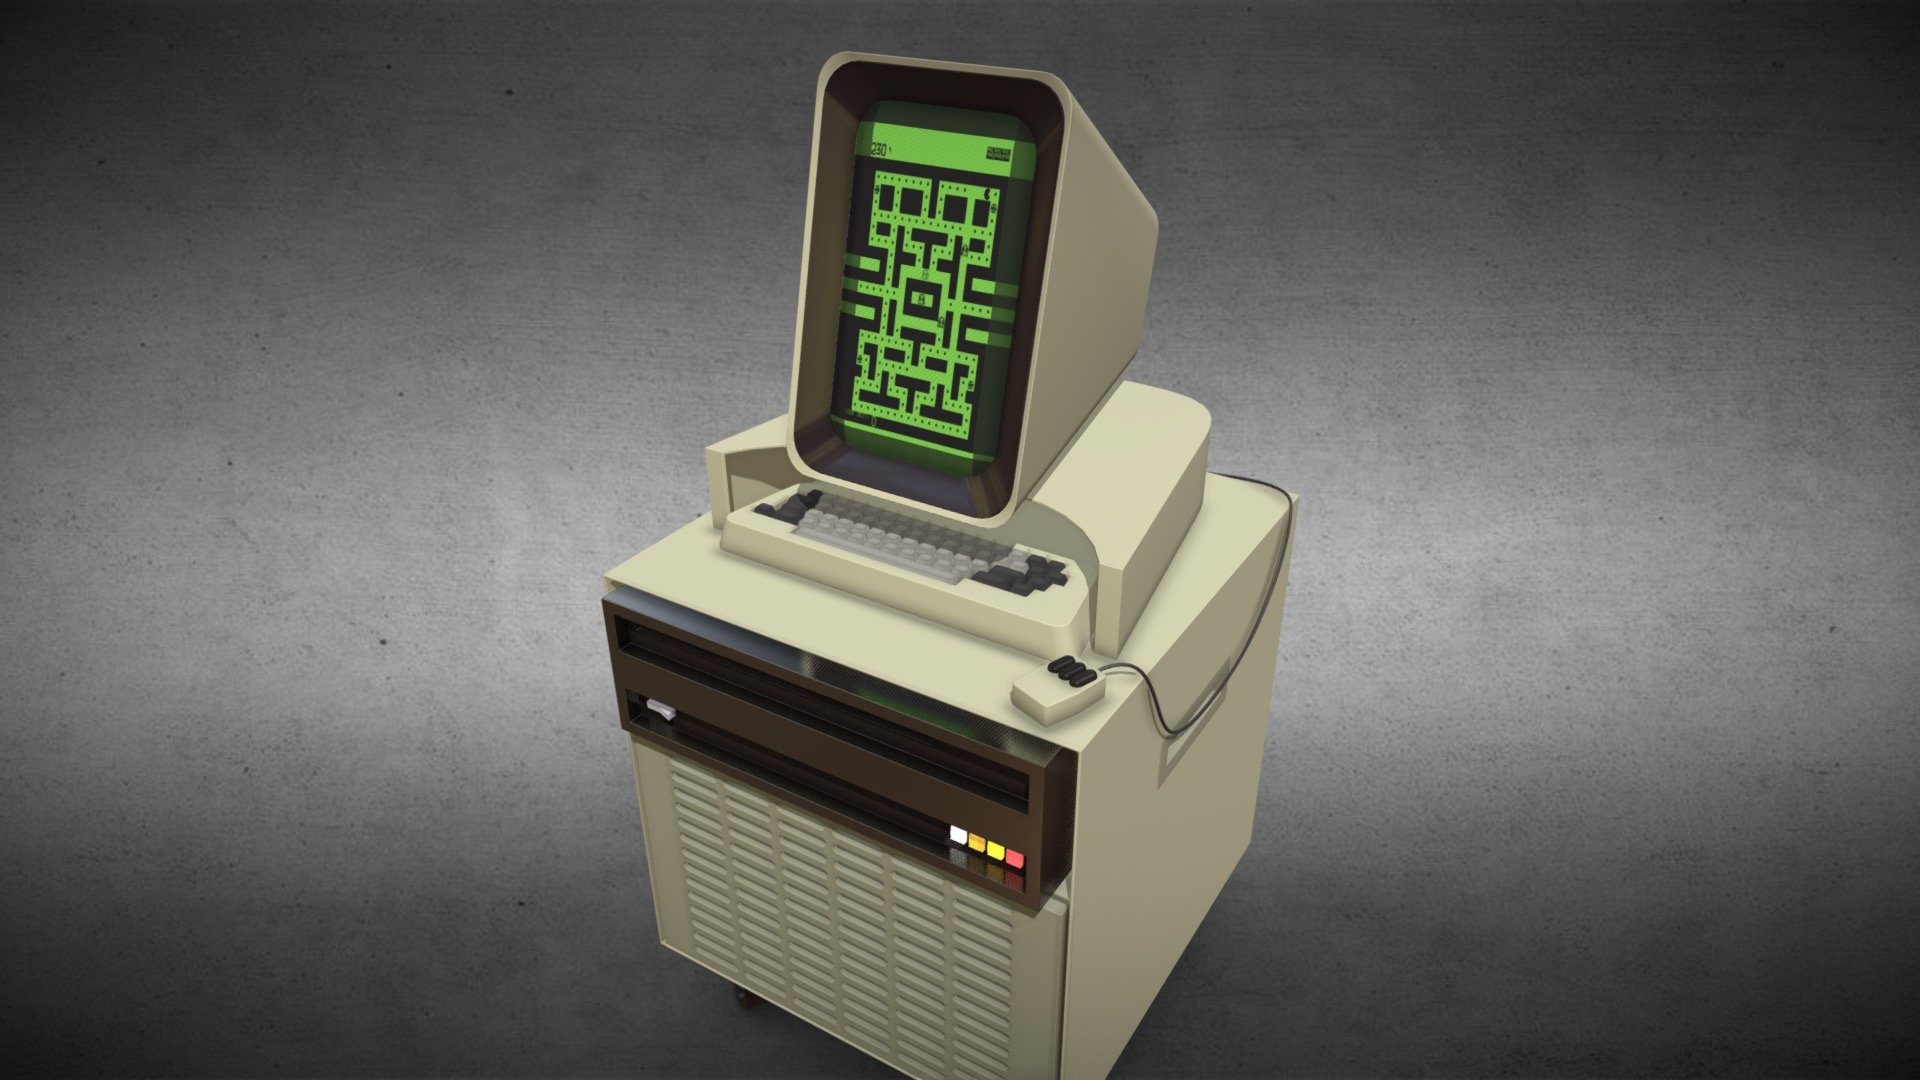 This model of the Xerox Alto, a revolutionary microcomputer from 1973, showcases the essential design elements of this influential machine. Resembling a compact office cabinet with its beige-colored exterior and prominent Xerox branding, the 3D representation allows users to explore its front panel features, including an array of buttons, switches, and indicator lights.

This model highlights the Alto's historical significance as the first computer to introduce concepts such as the GUI, mouse input, Ethernet networking, and the foundational principles of desktop computing, providing an immersive and educational experience into the origins of modern computing 3d model